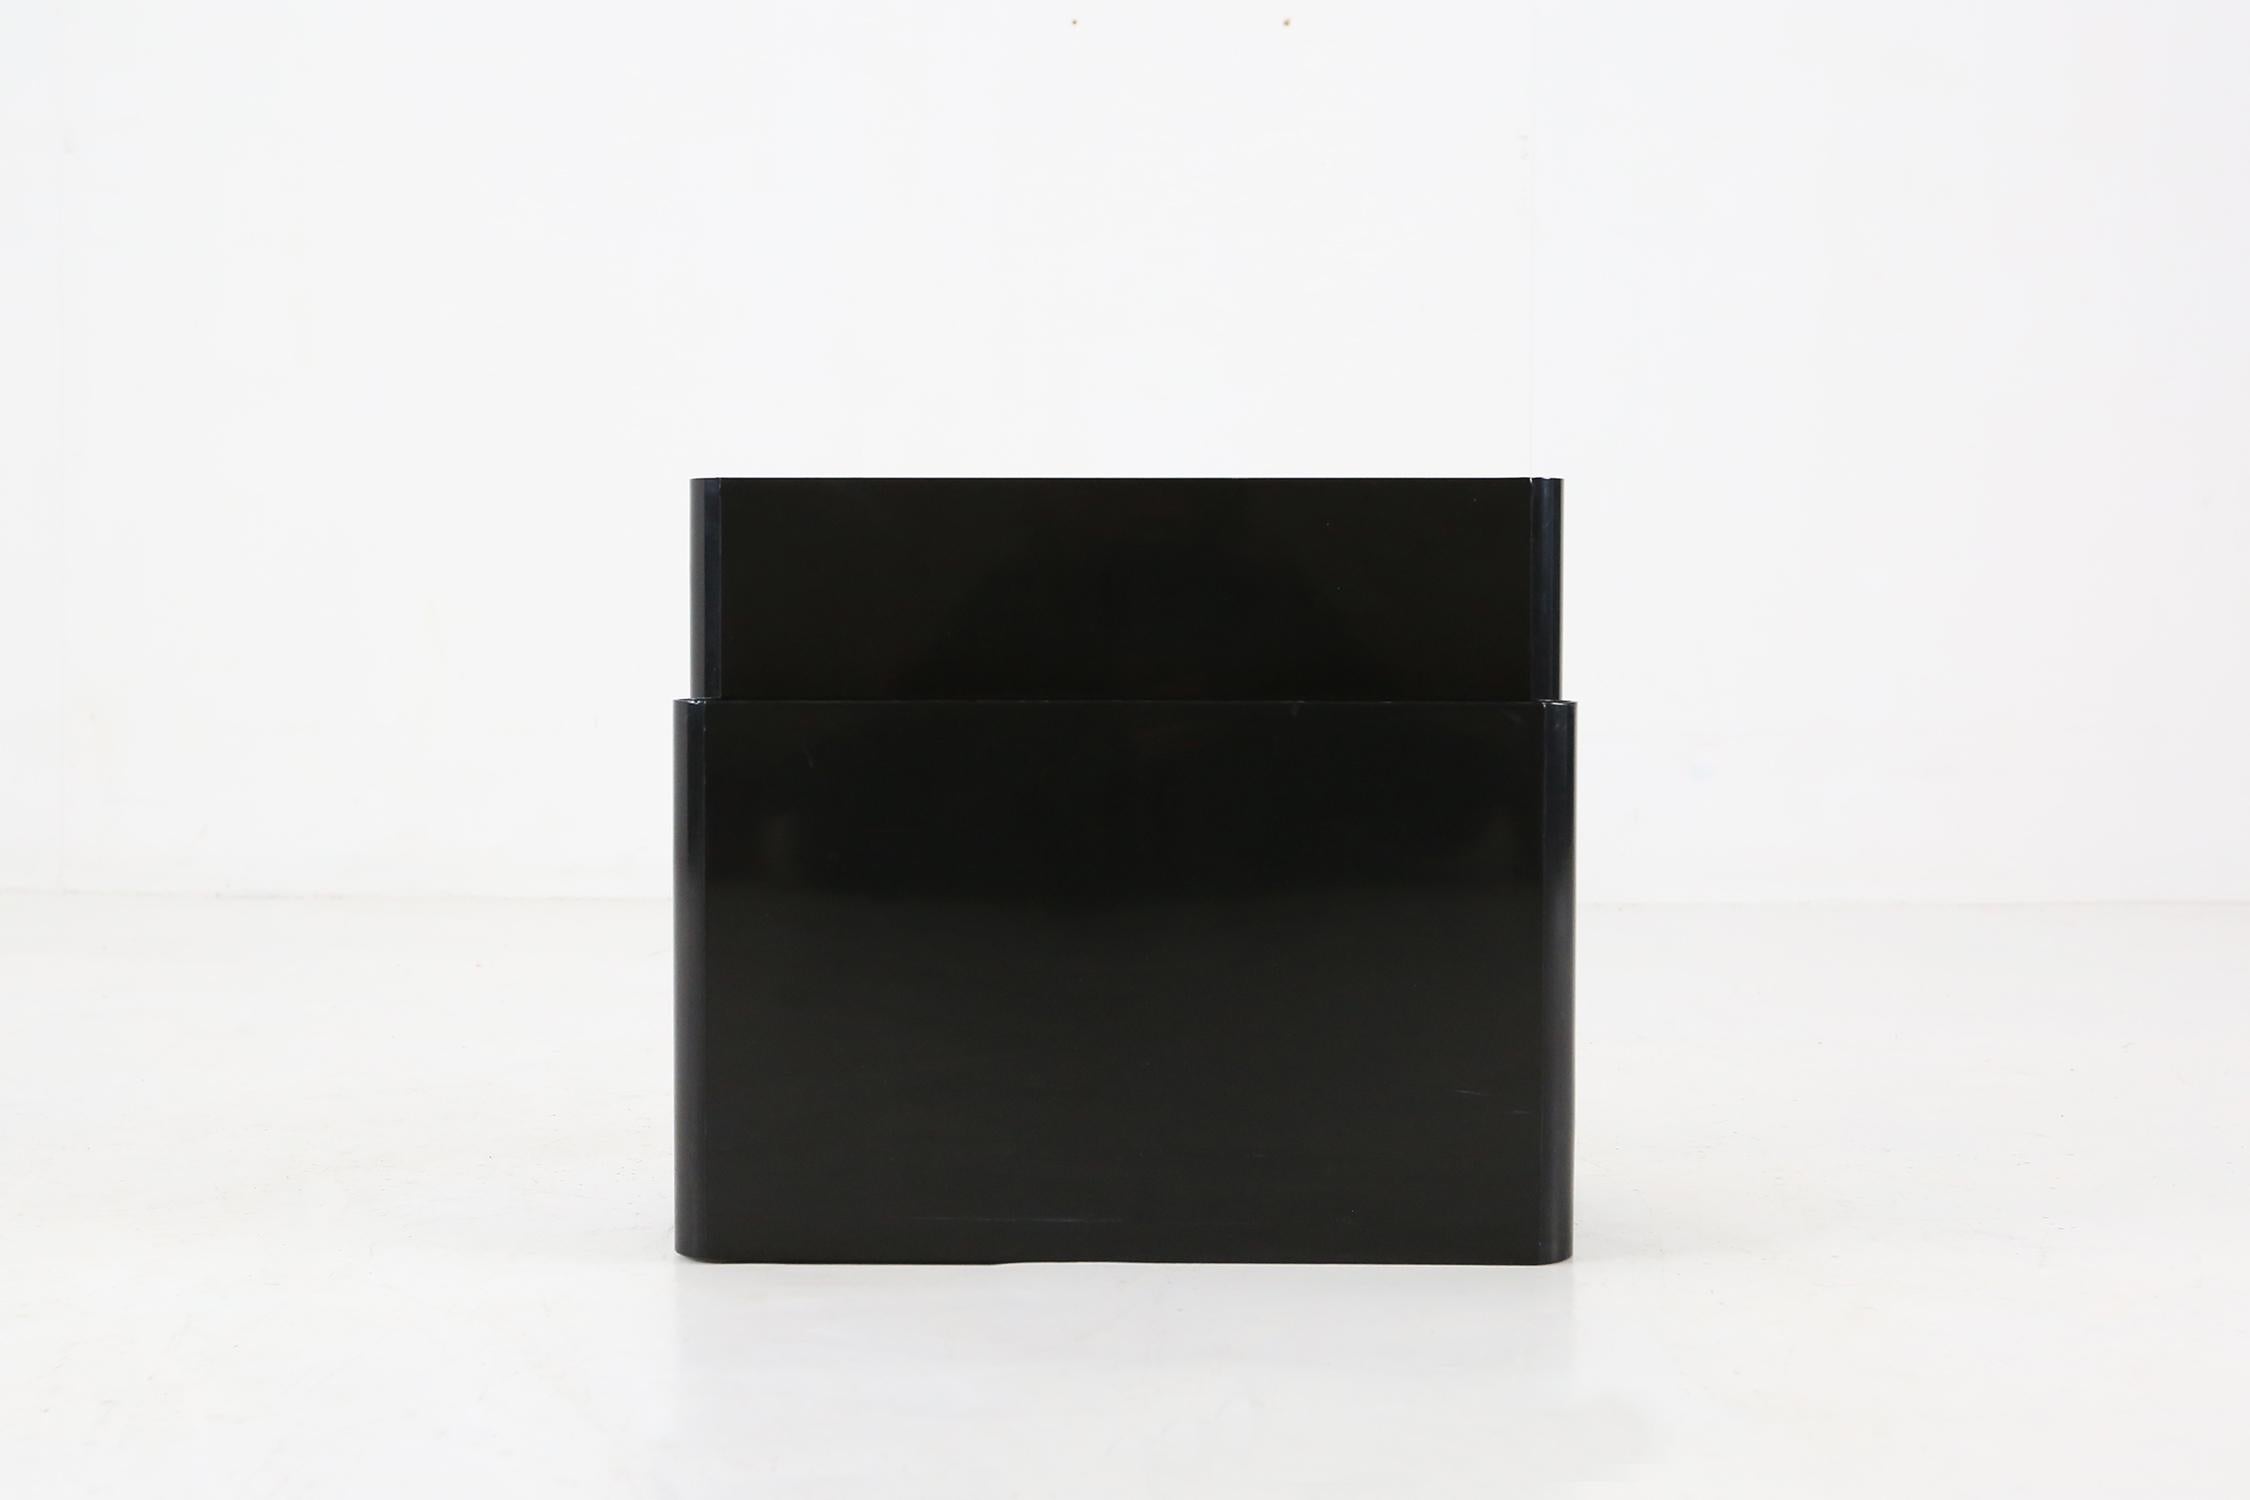 Magazine rack by Kartell, design Giotto Stoppino. A minimalist magazine rack made of black plastic from the 1970s. Center includes a handy carrying handle.